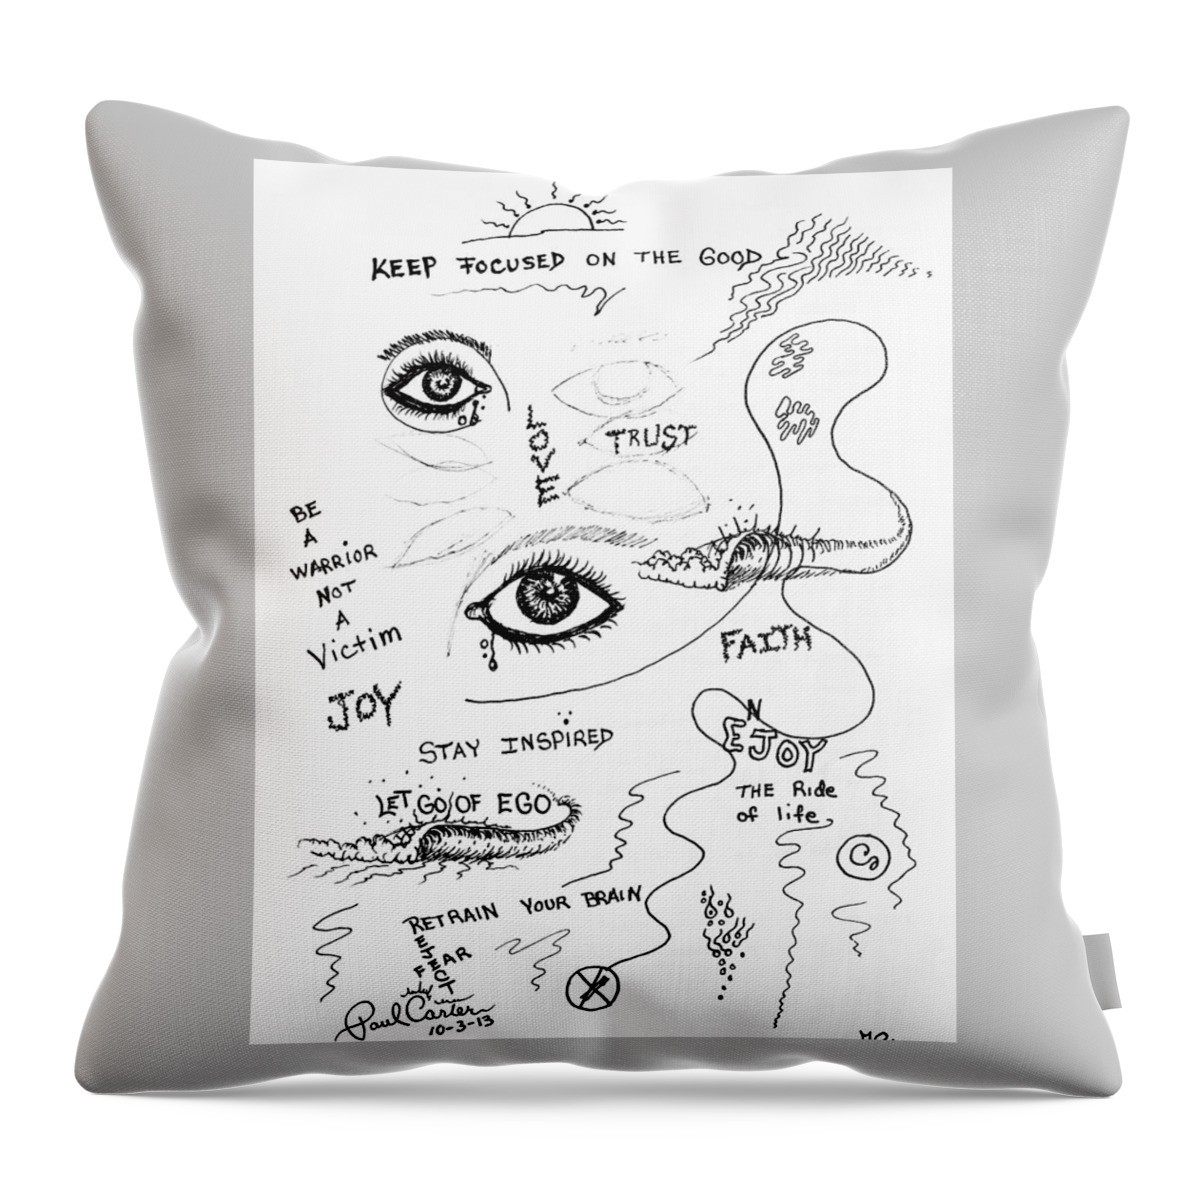 Paulcarterart Throw Pillow featuring the drawing Keep focused by Paul Carter